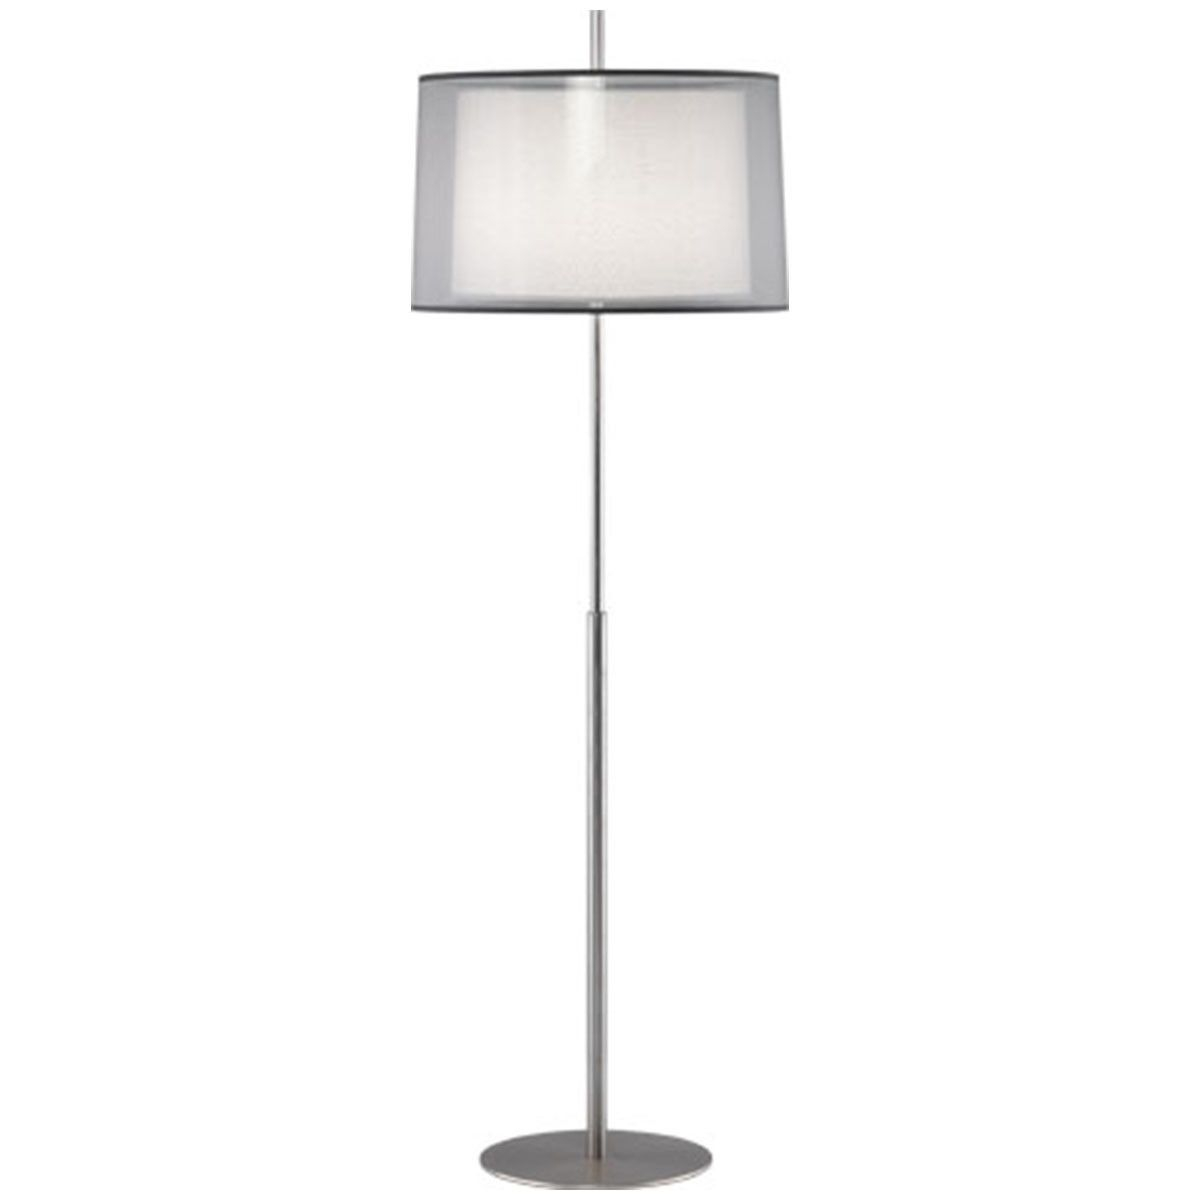 Robert Abbey Saturnia Floor Lamp S2191 Contemporary Floor intended for dimensions 1200 X 1200